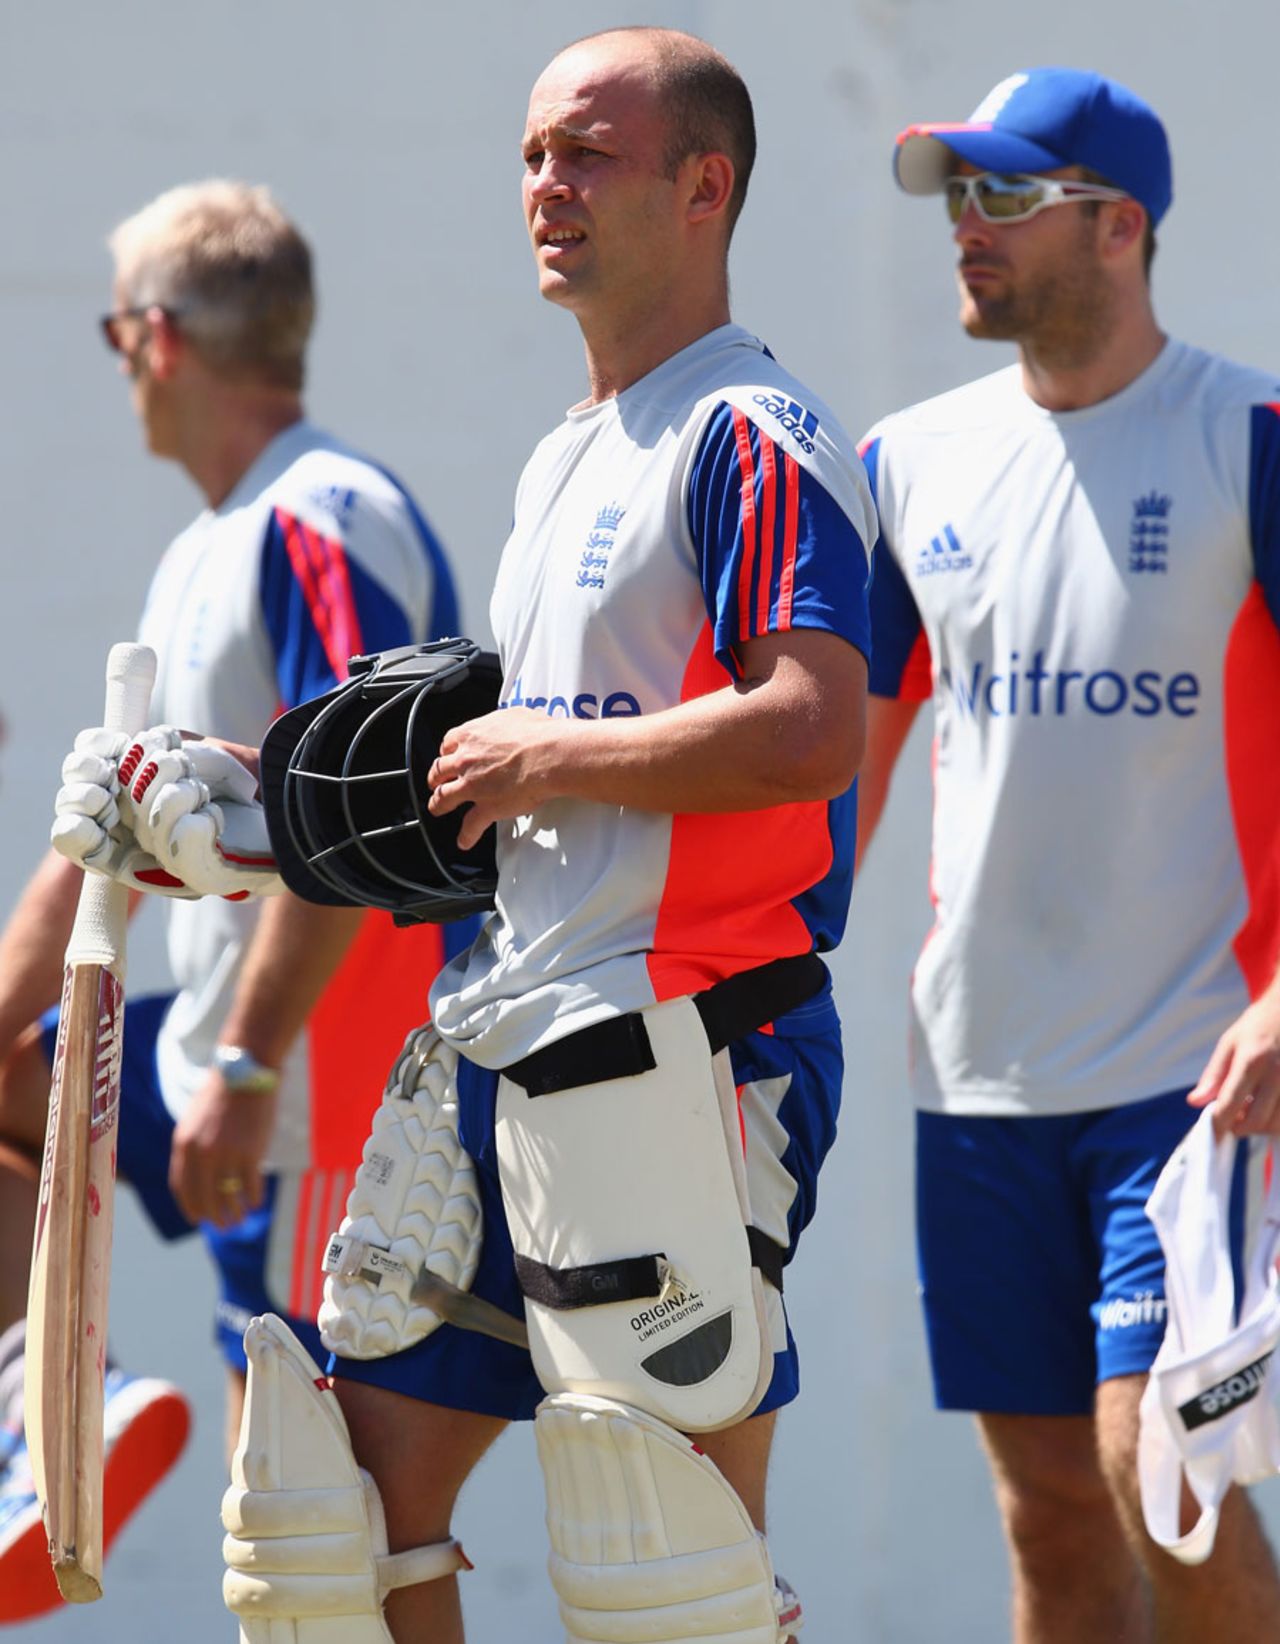 Jonathan Trott prepares to bat in the nets during a training session, St Kitts, April 5, 2015